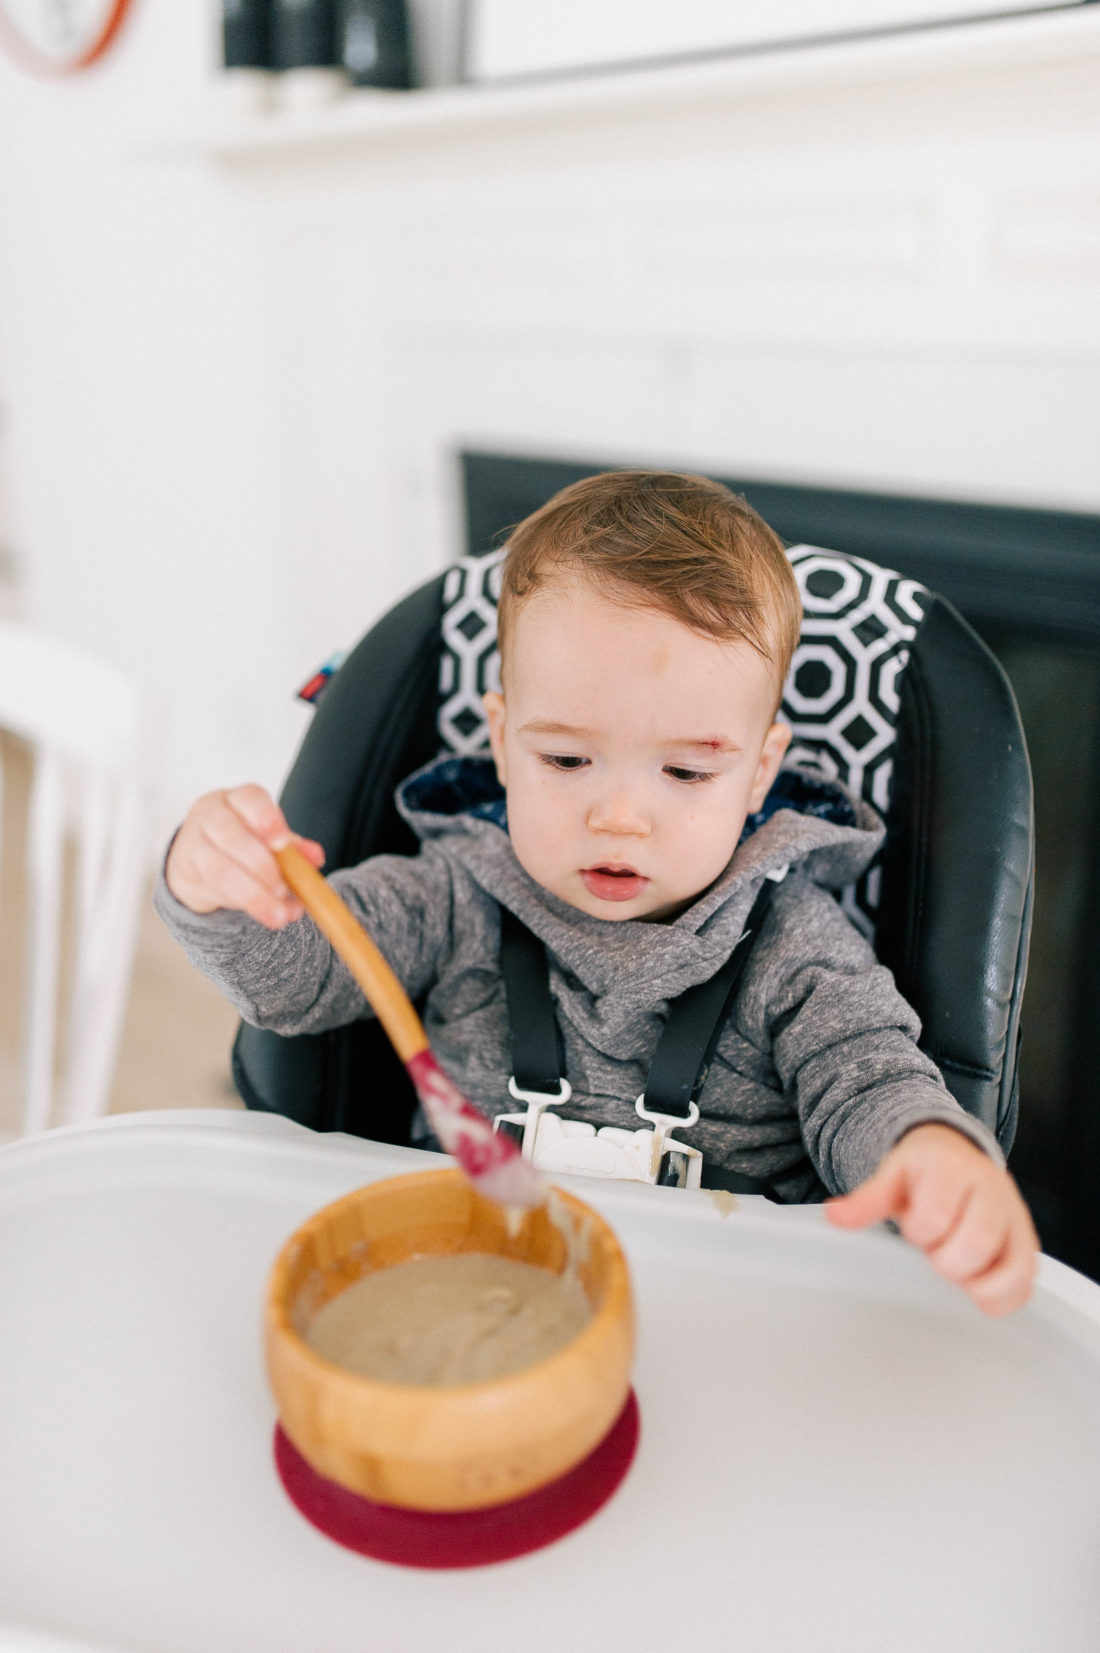 Major Martino eats porridge in his high chair that has SpoonfulOne mixed in to it